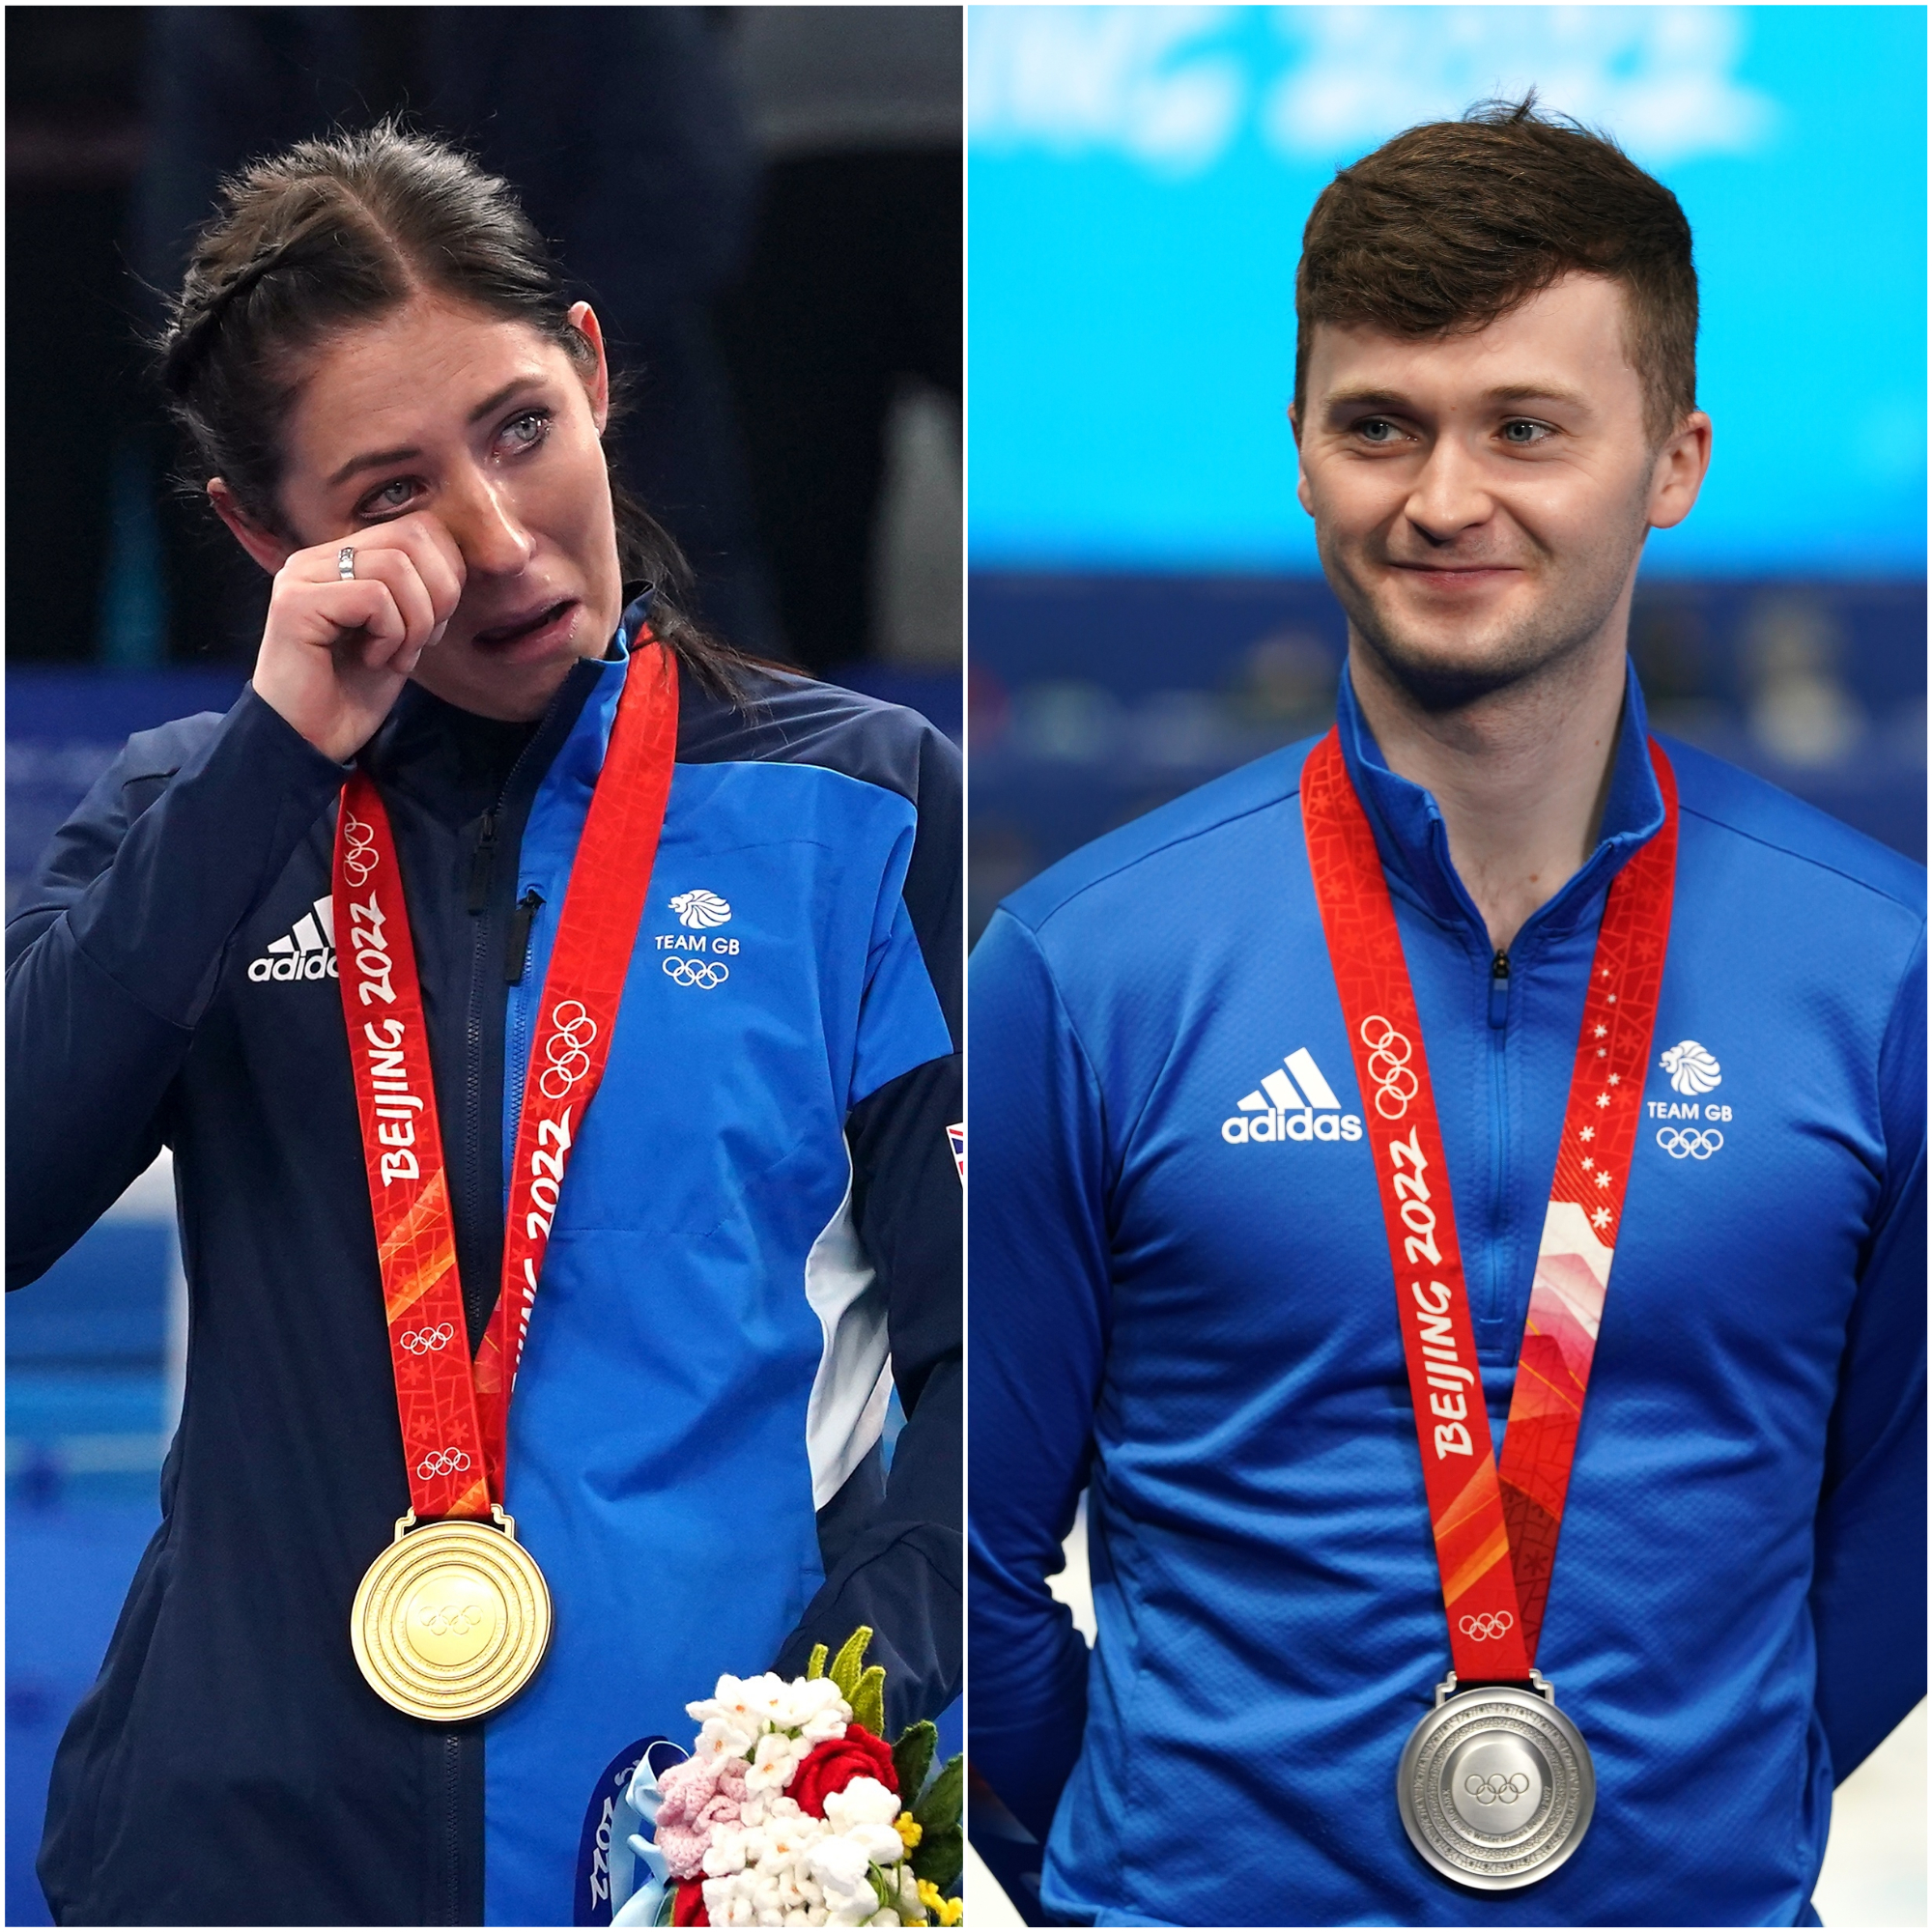 Eve Muirhead, left, and Bruce Mouat with their medals